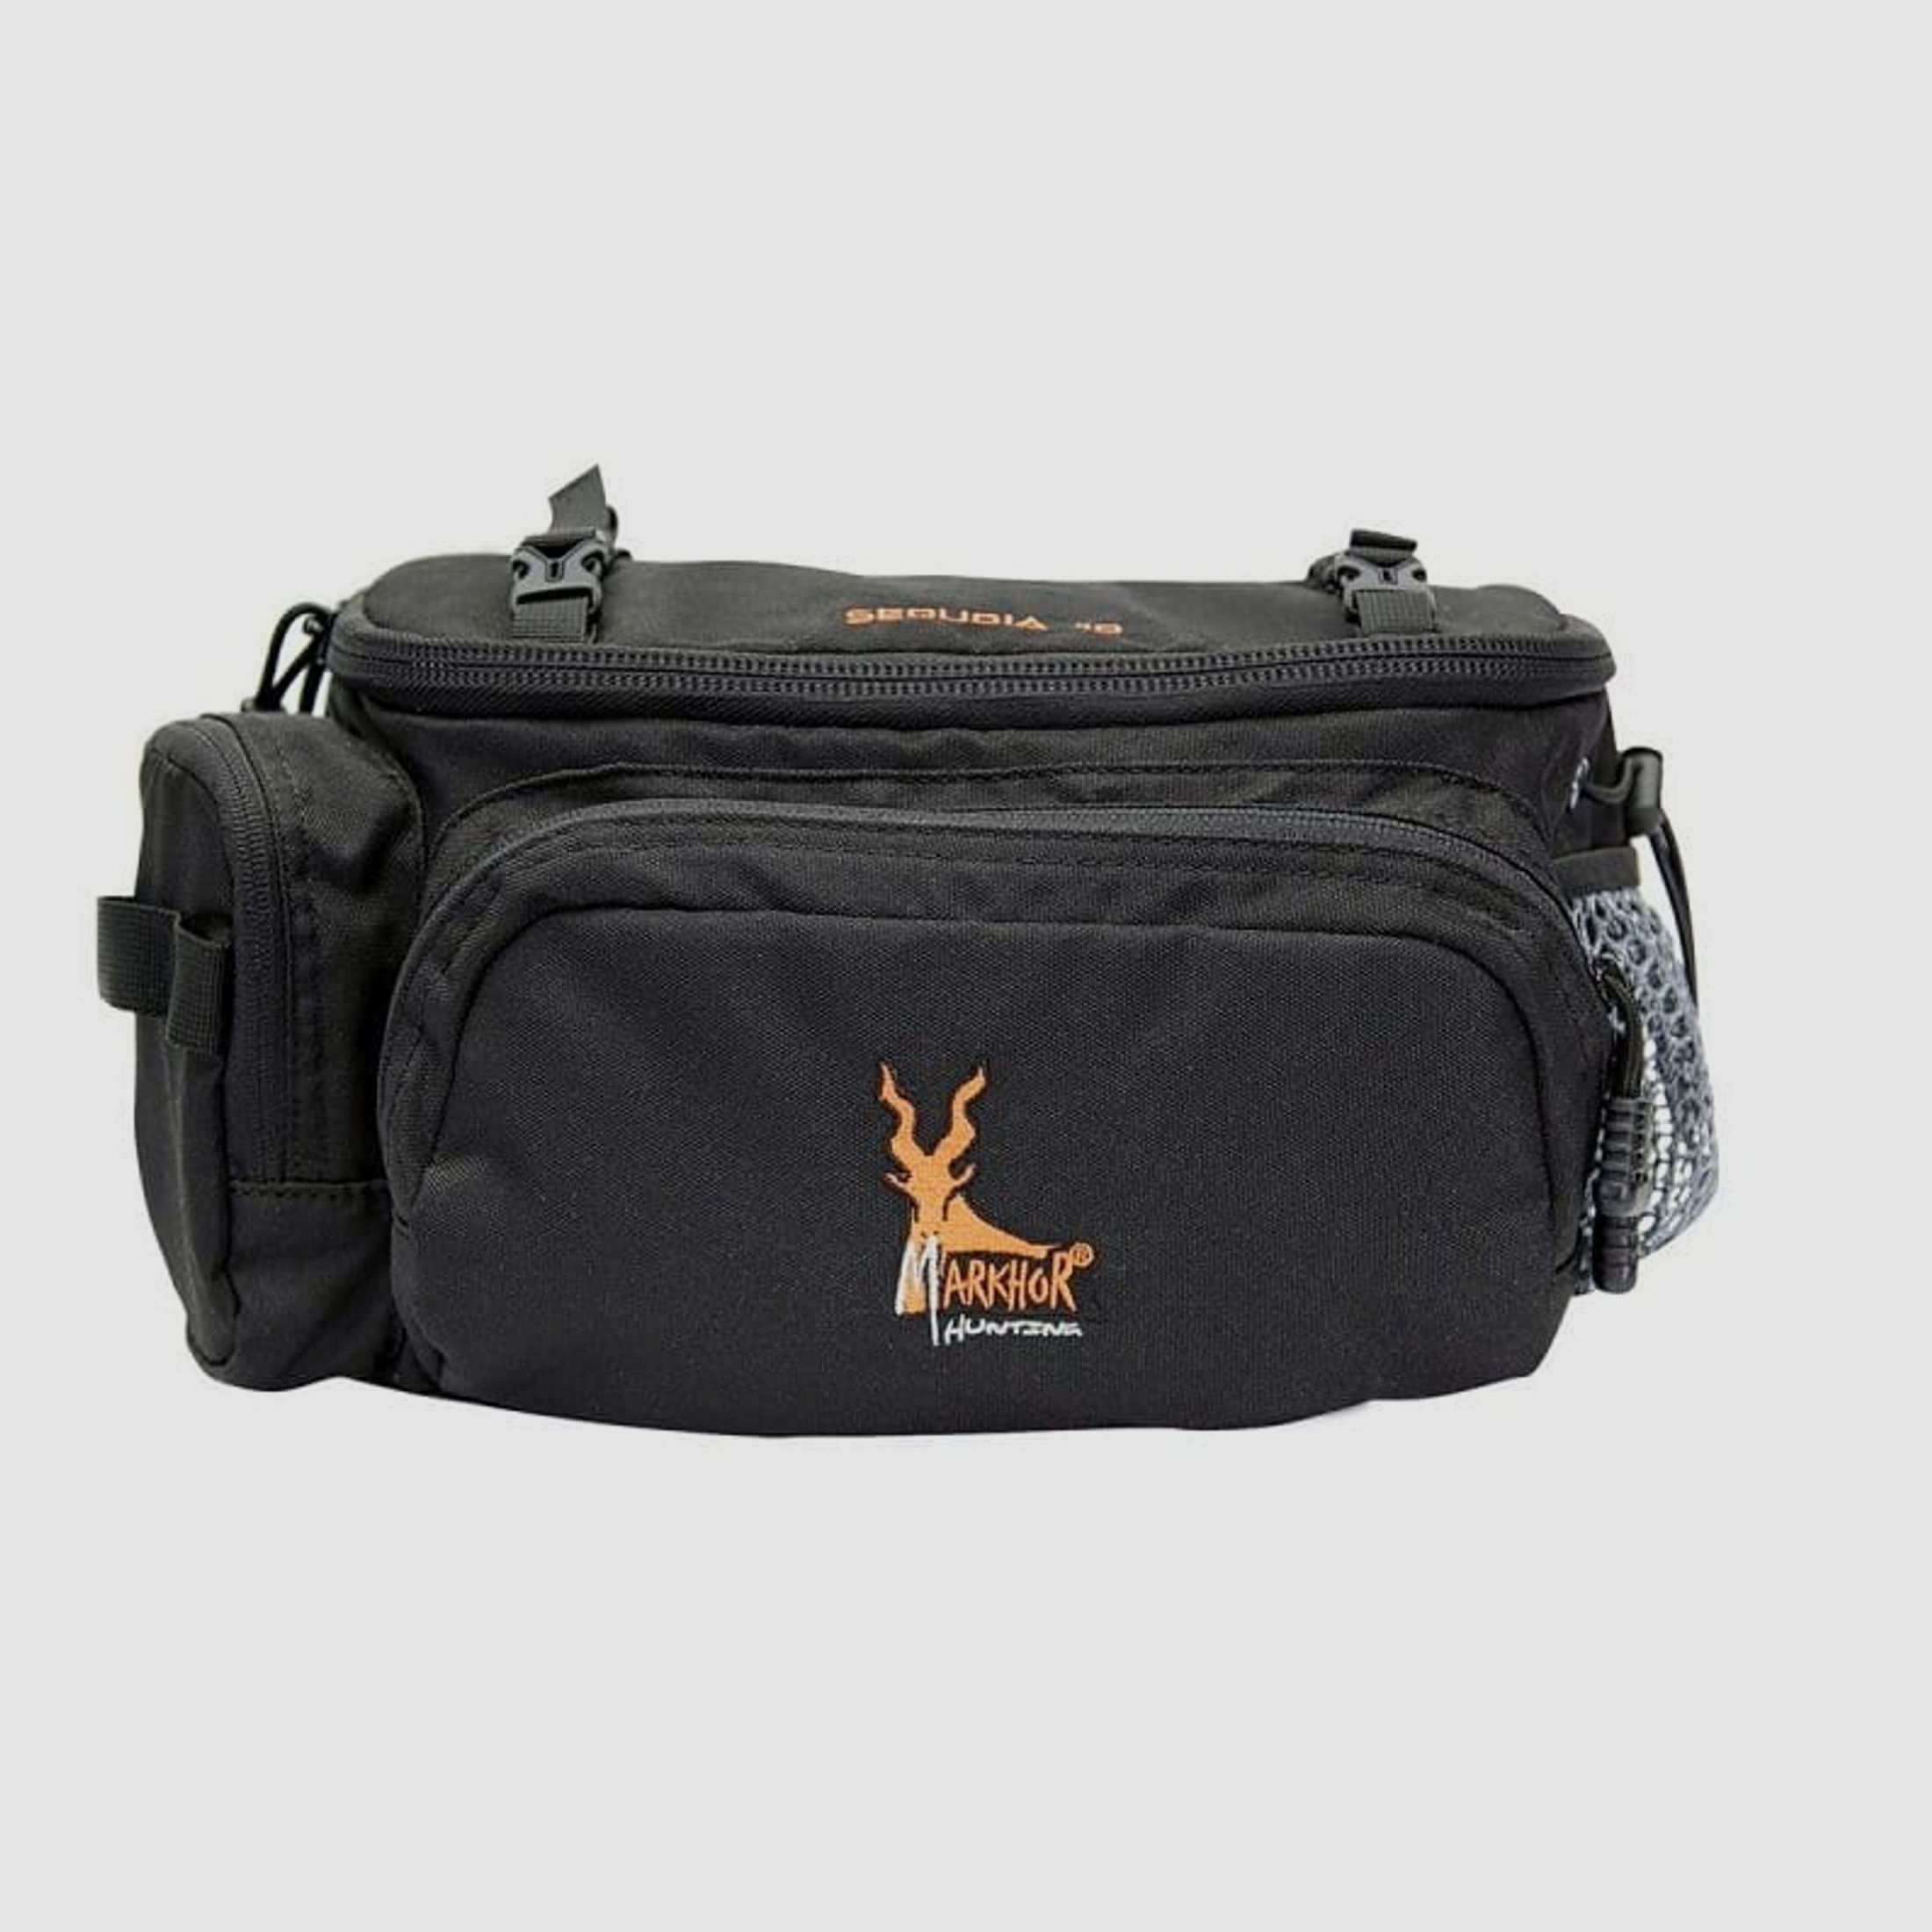 Markhor Hunting Sequoia Tasche 10 L